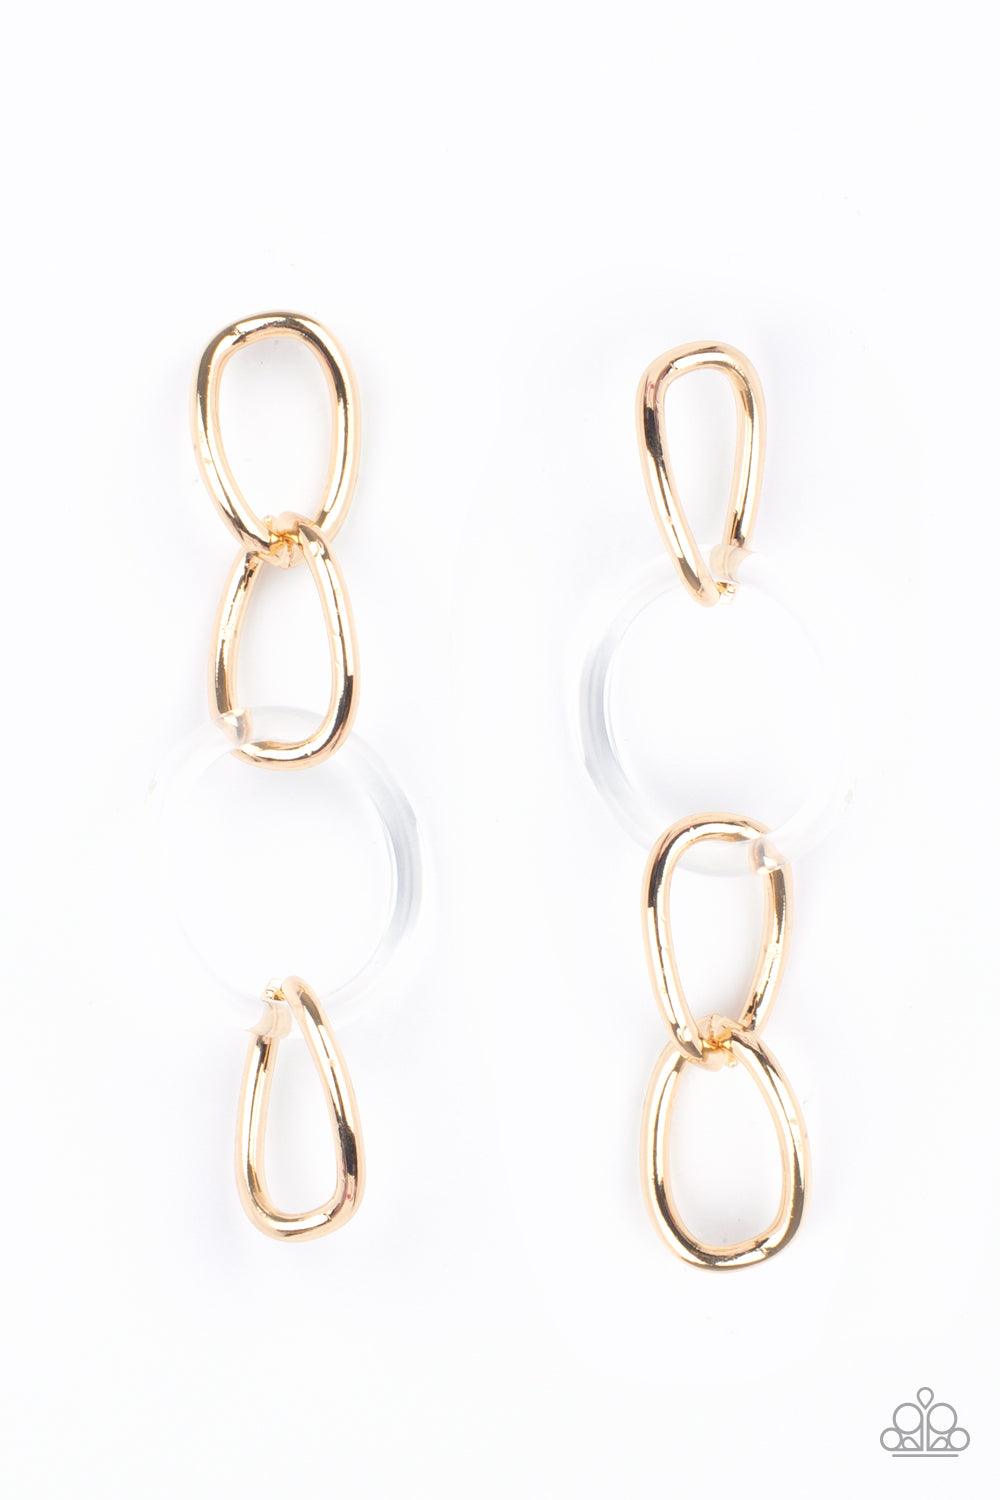 Paparazzi Accessories Talk In Circles - Gold Bright gold oversized links, interrupted by a single large clear acrylic ring, fall from the ear in linked succession for an on-trend fashion statement. Earring attaches to a standard post fitting. Sold as one